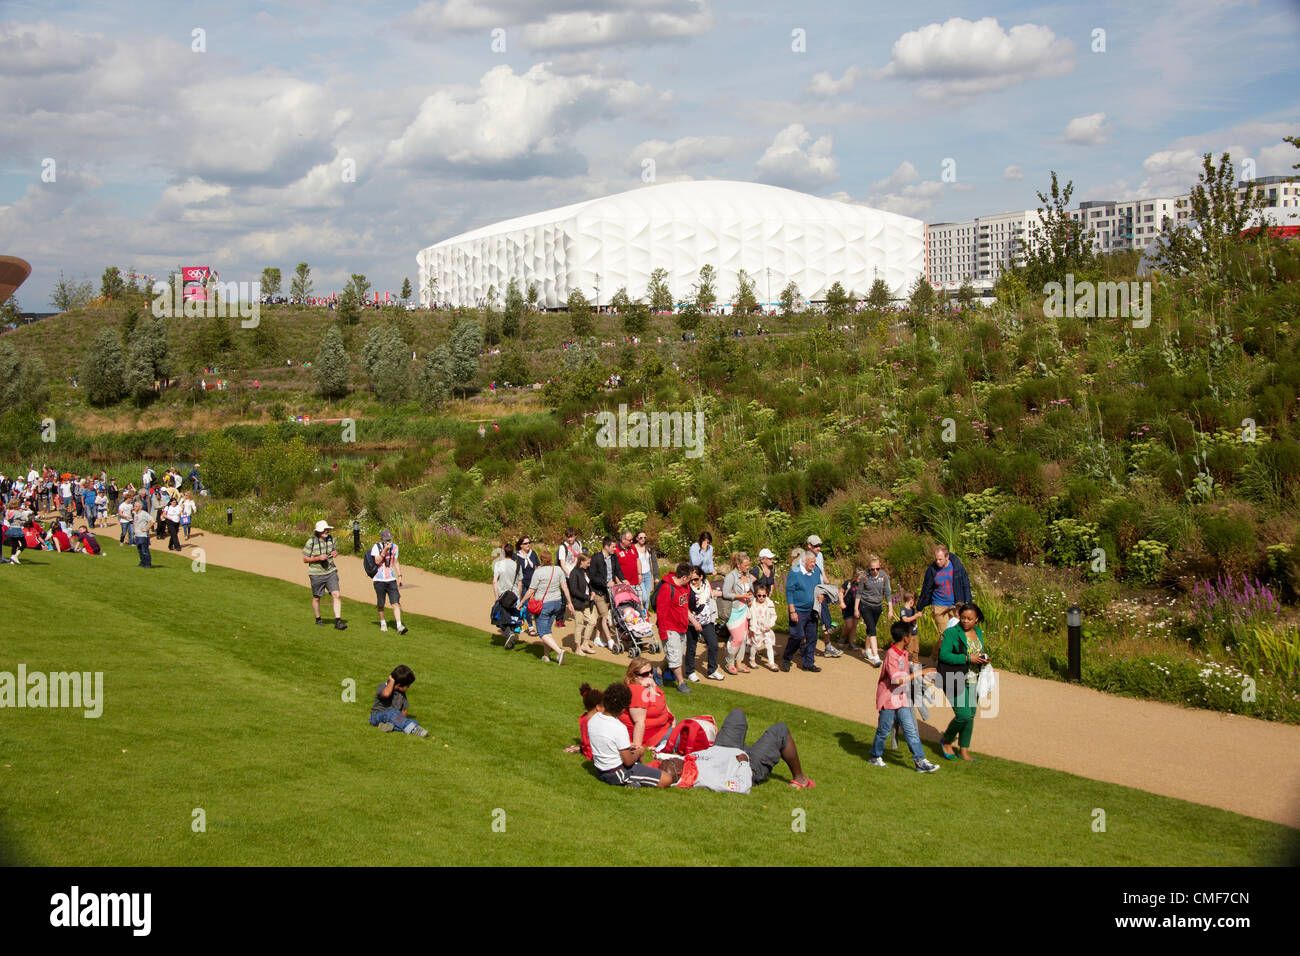 People sitting on lawns in sunshine on a sunny day with Basketball Arena at Olympic Park, London 2012 Olympic Games site, Stratford London E20 UK, Stock Photo